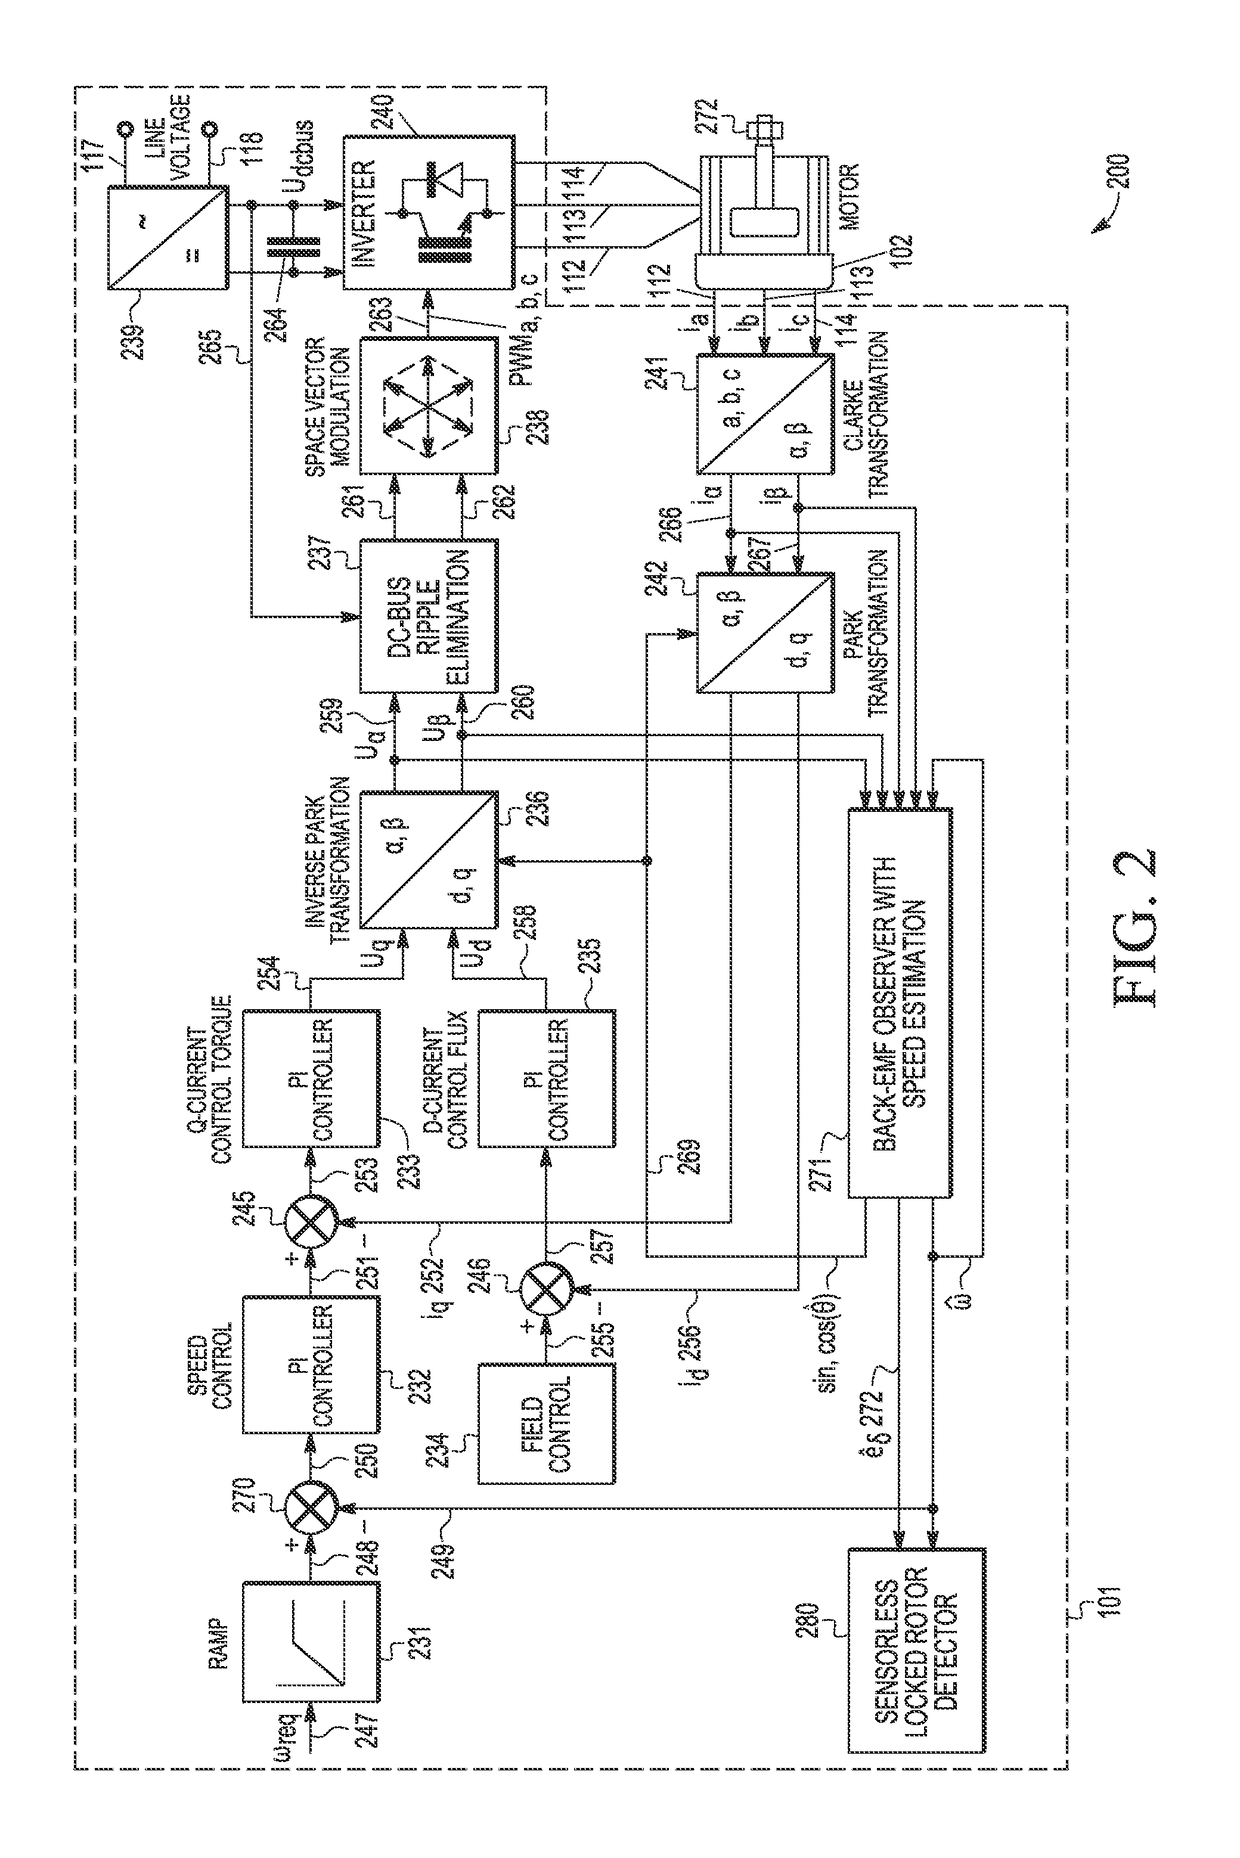 Method and apparatus for motor lock or stall detection